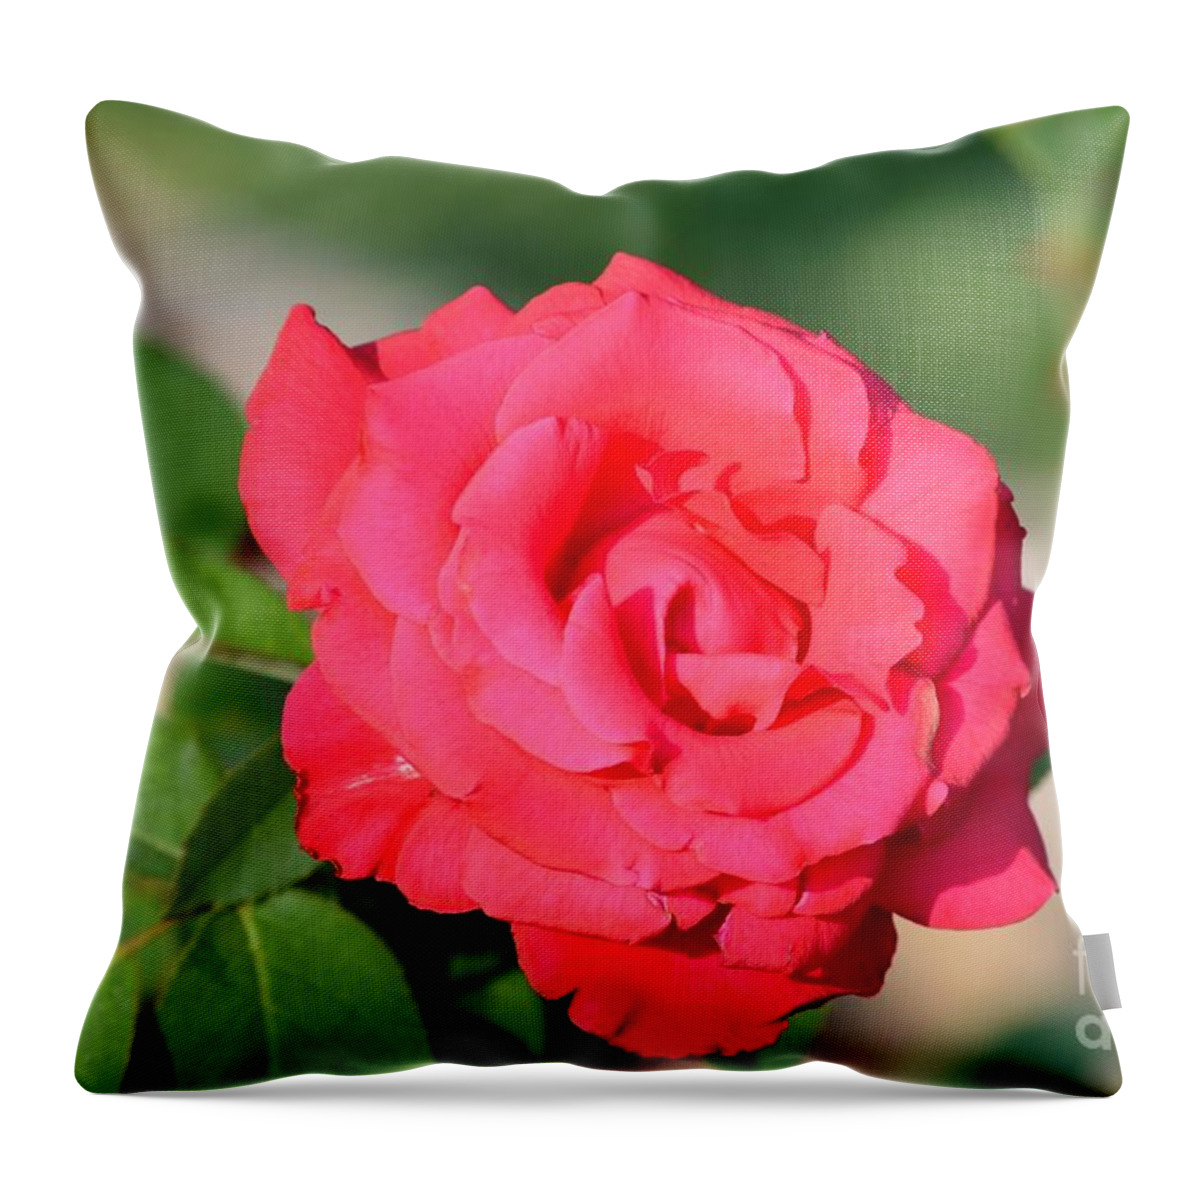 Rose Throw Pillow featuring the photograph Rose In the Morninglight by Maria Urso